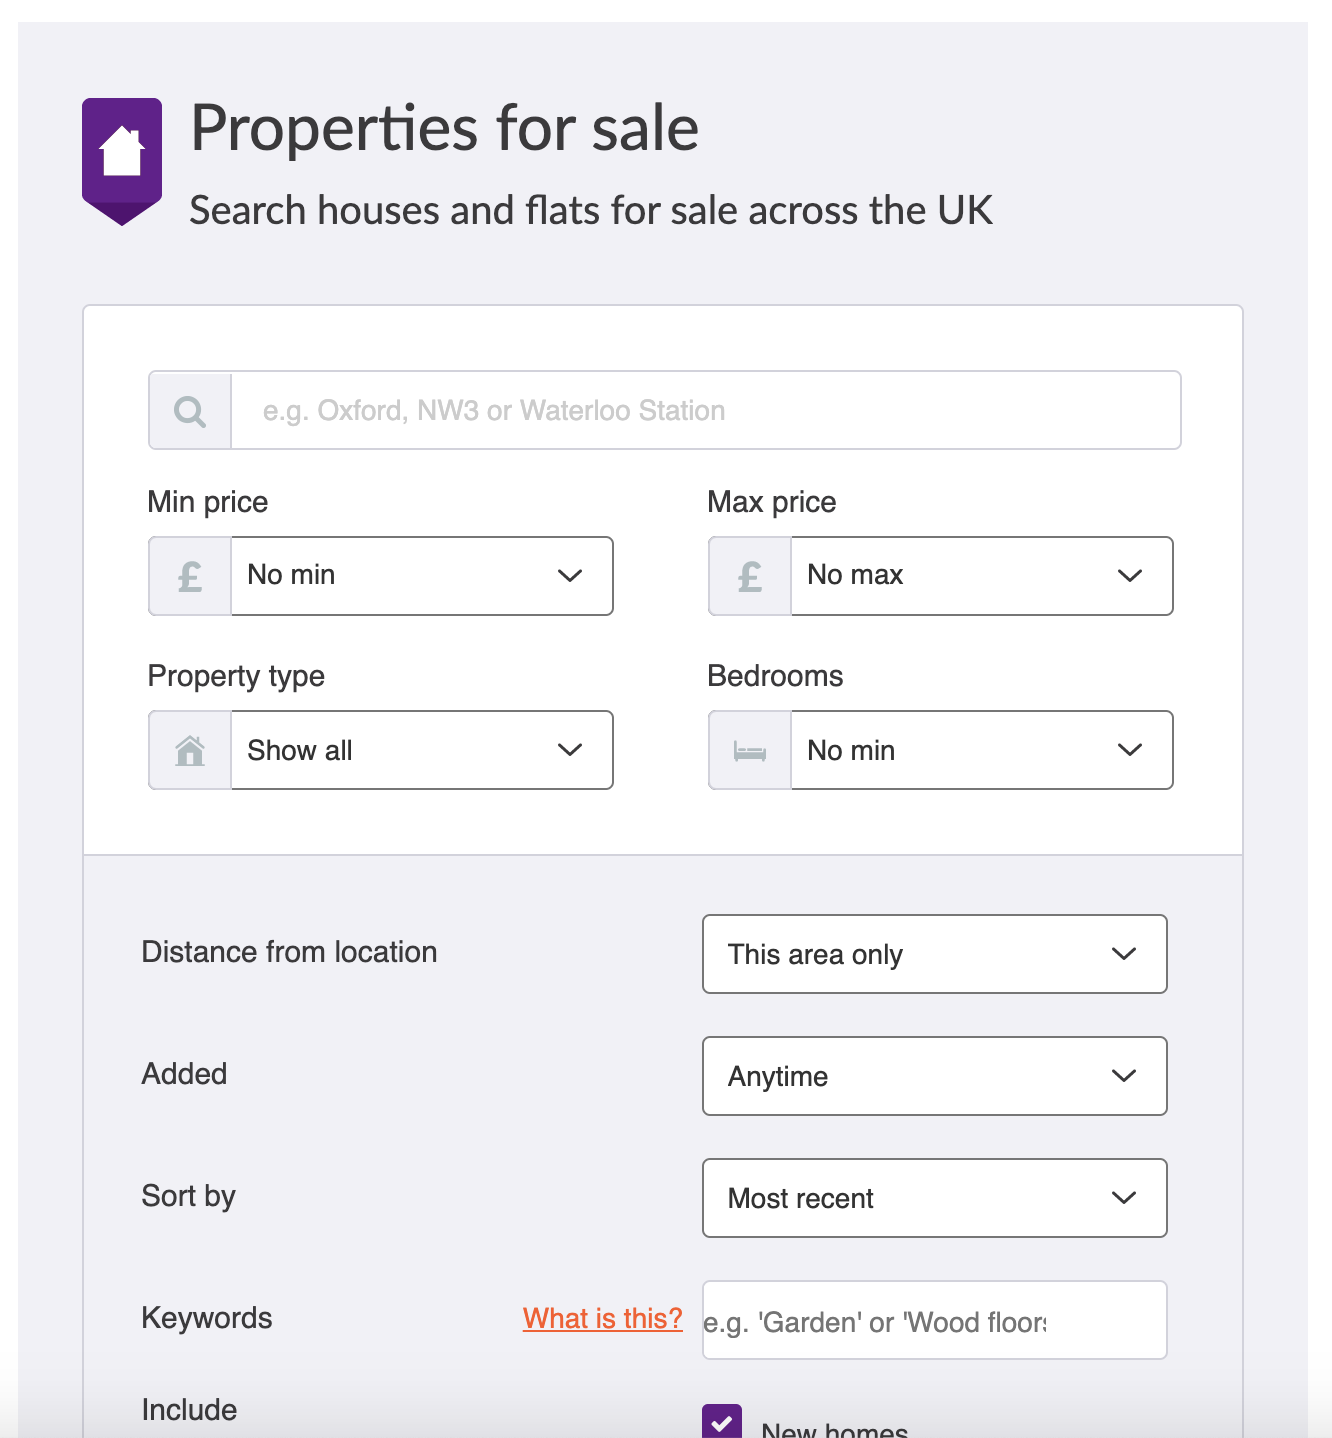 Image of Zoopla house search portal 'Advanced Search' tool